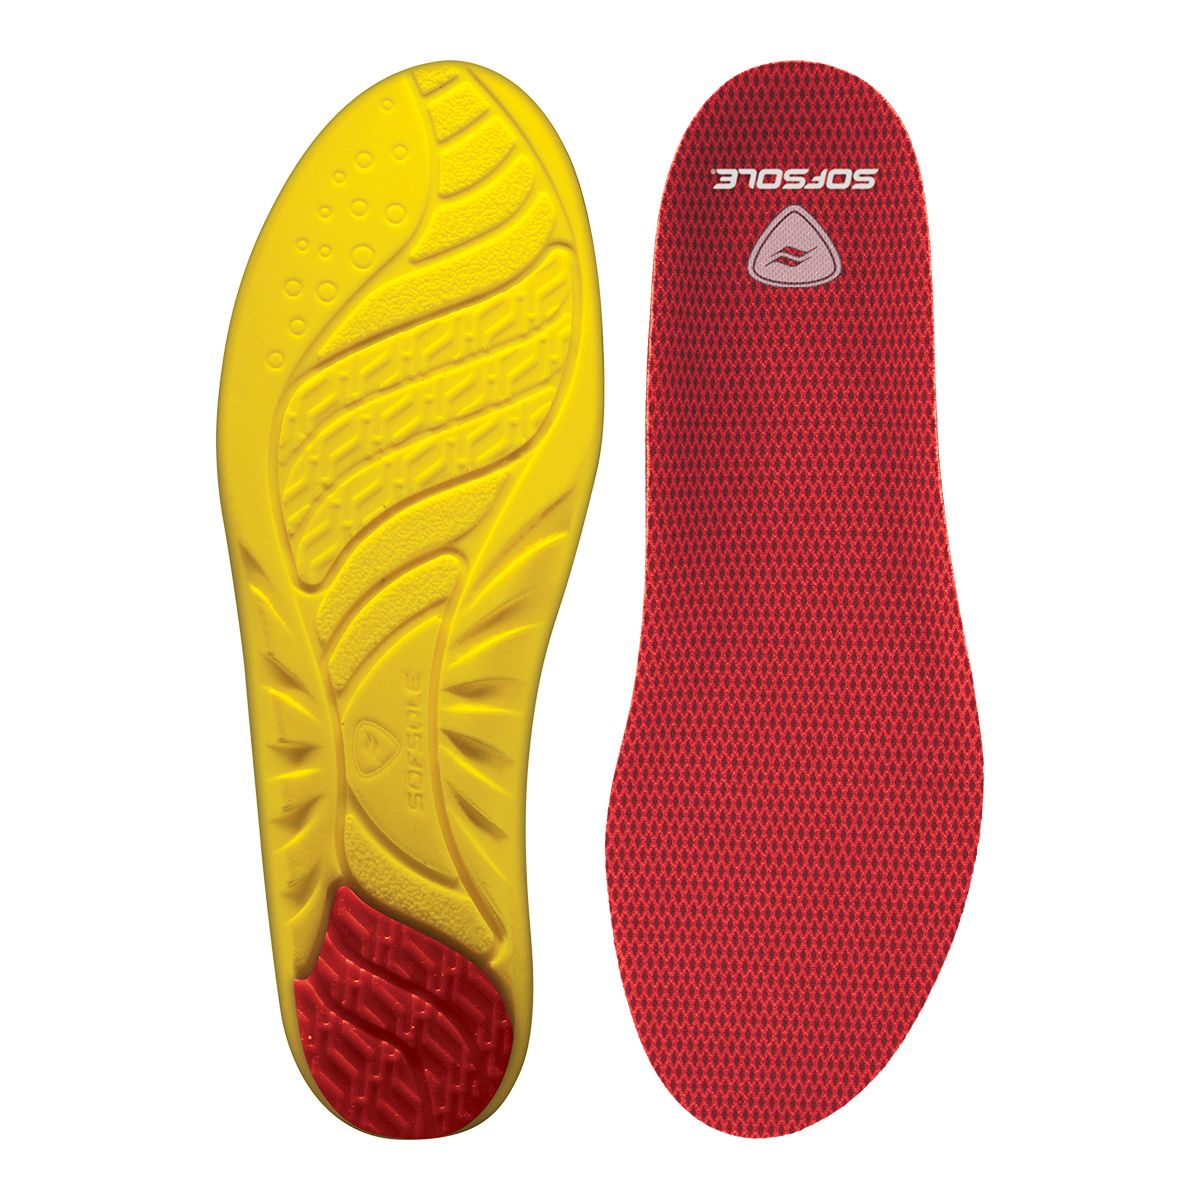 Image of Sof Sole Men's Arch Insoles Shoe Inserts